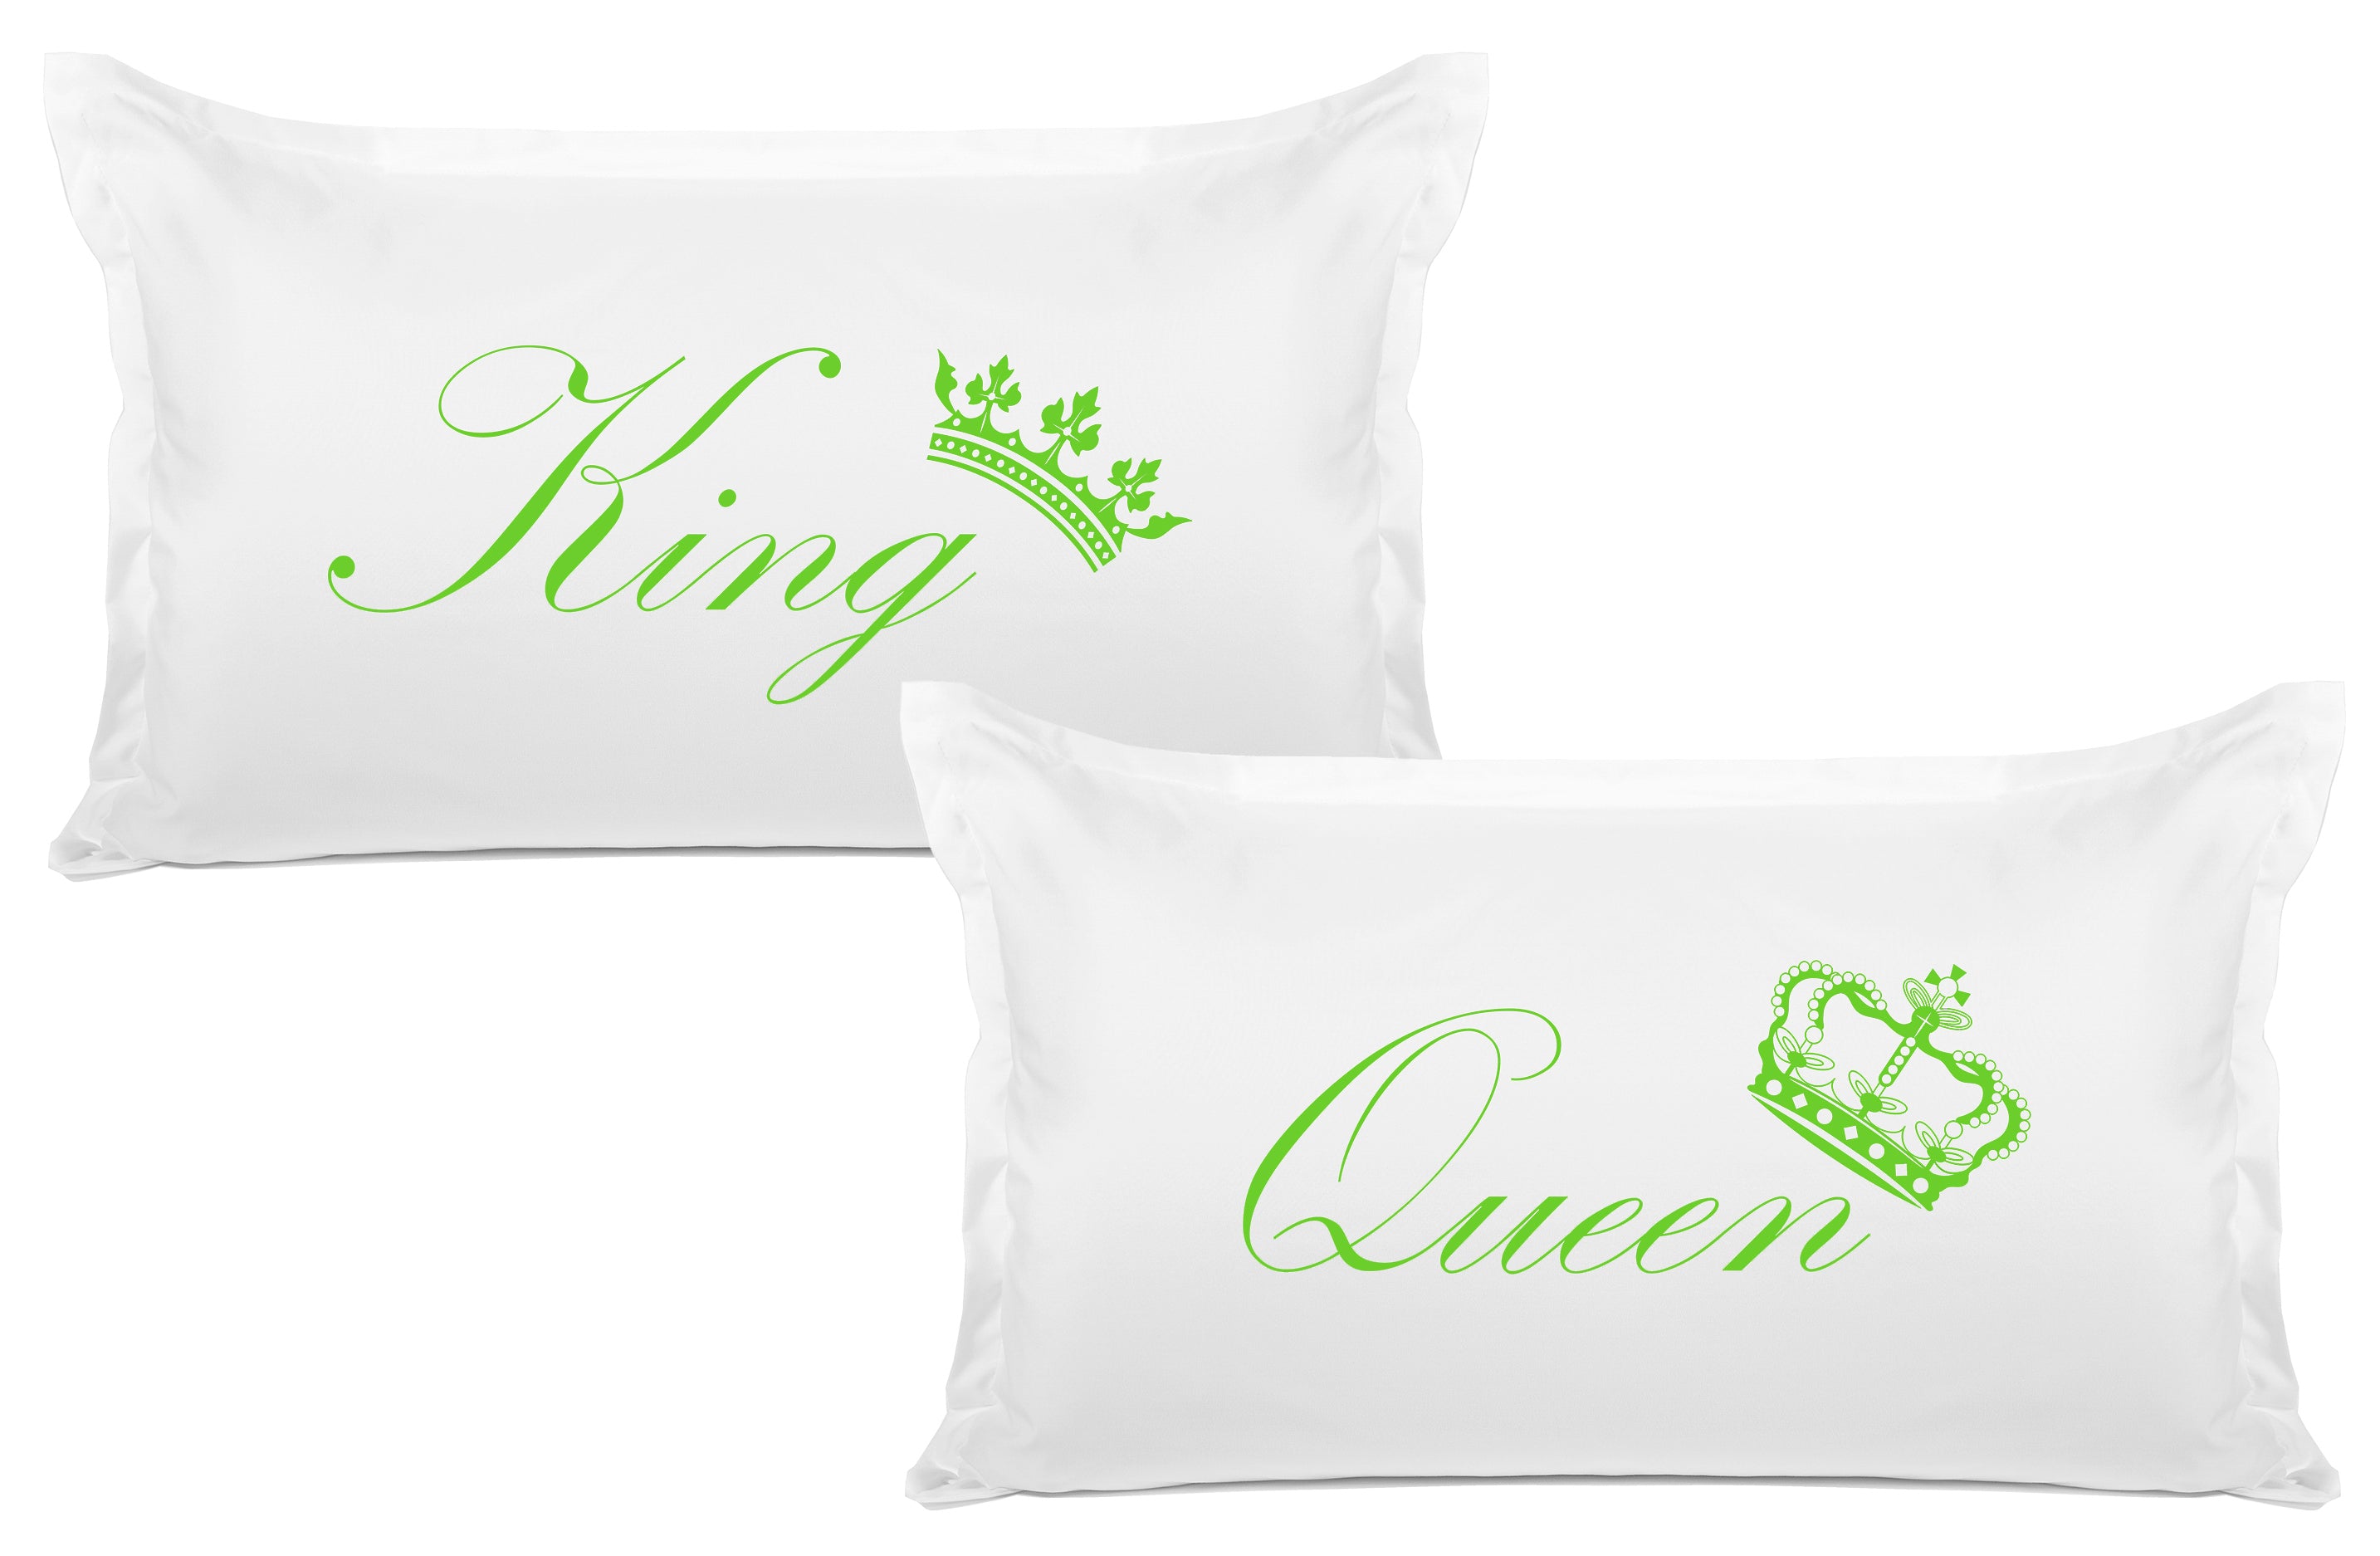 King Crown, Queen Crown - His & Hers Pillowcase Collection-Di Lewis